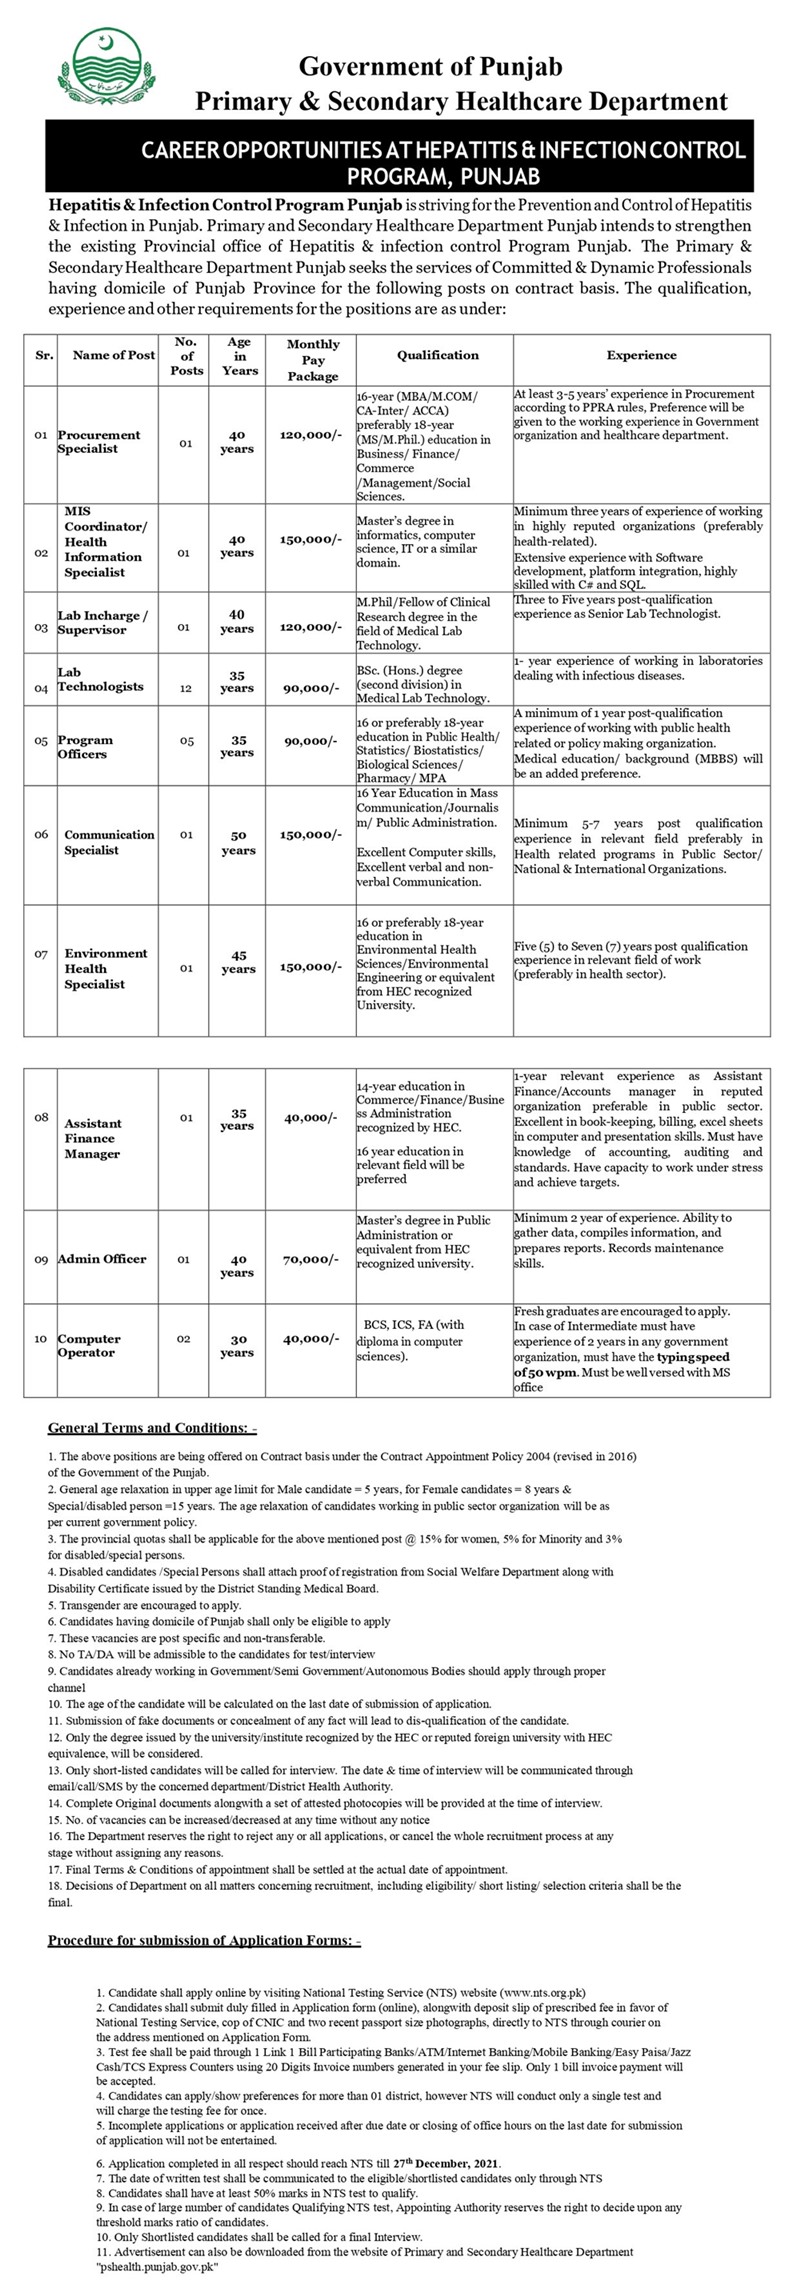 NTS Primary and Secondary Healthcare Punjab Jobs 2021 Online Registration